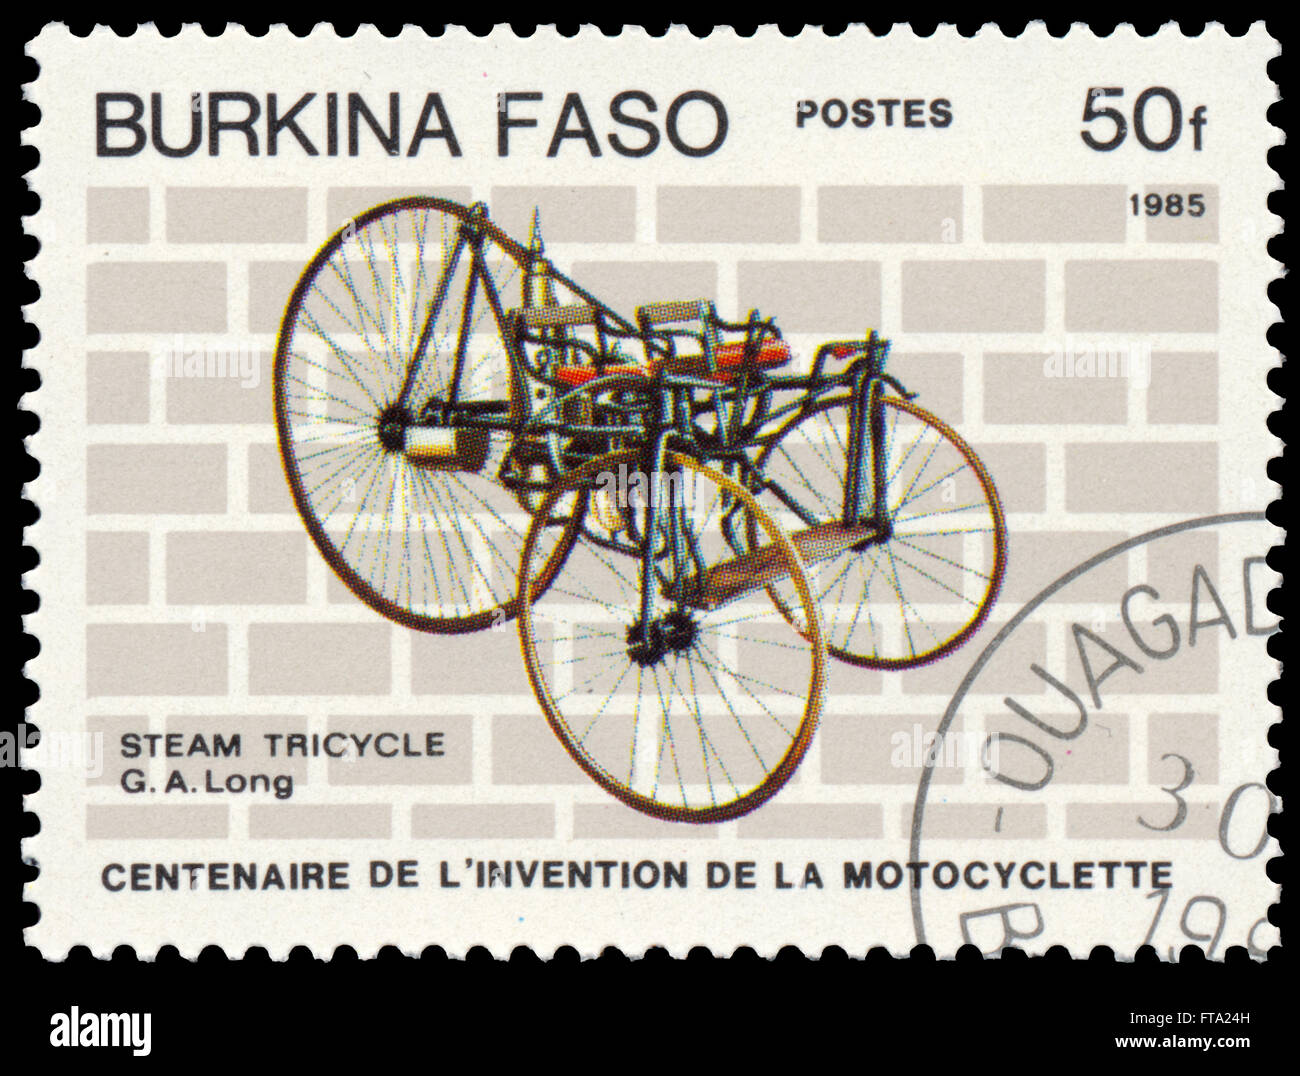 BUDAPEST, HUNGARY - 18 march 2016:  a stamp printed in Burkina Faso shows image of a vintage motorcycle, Stem Tricycle, G.A. Lon Stock Photo